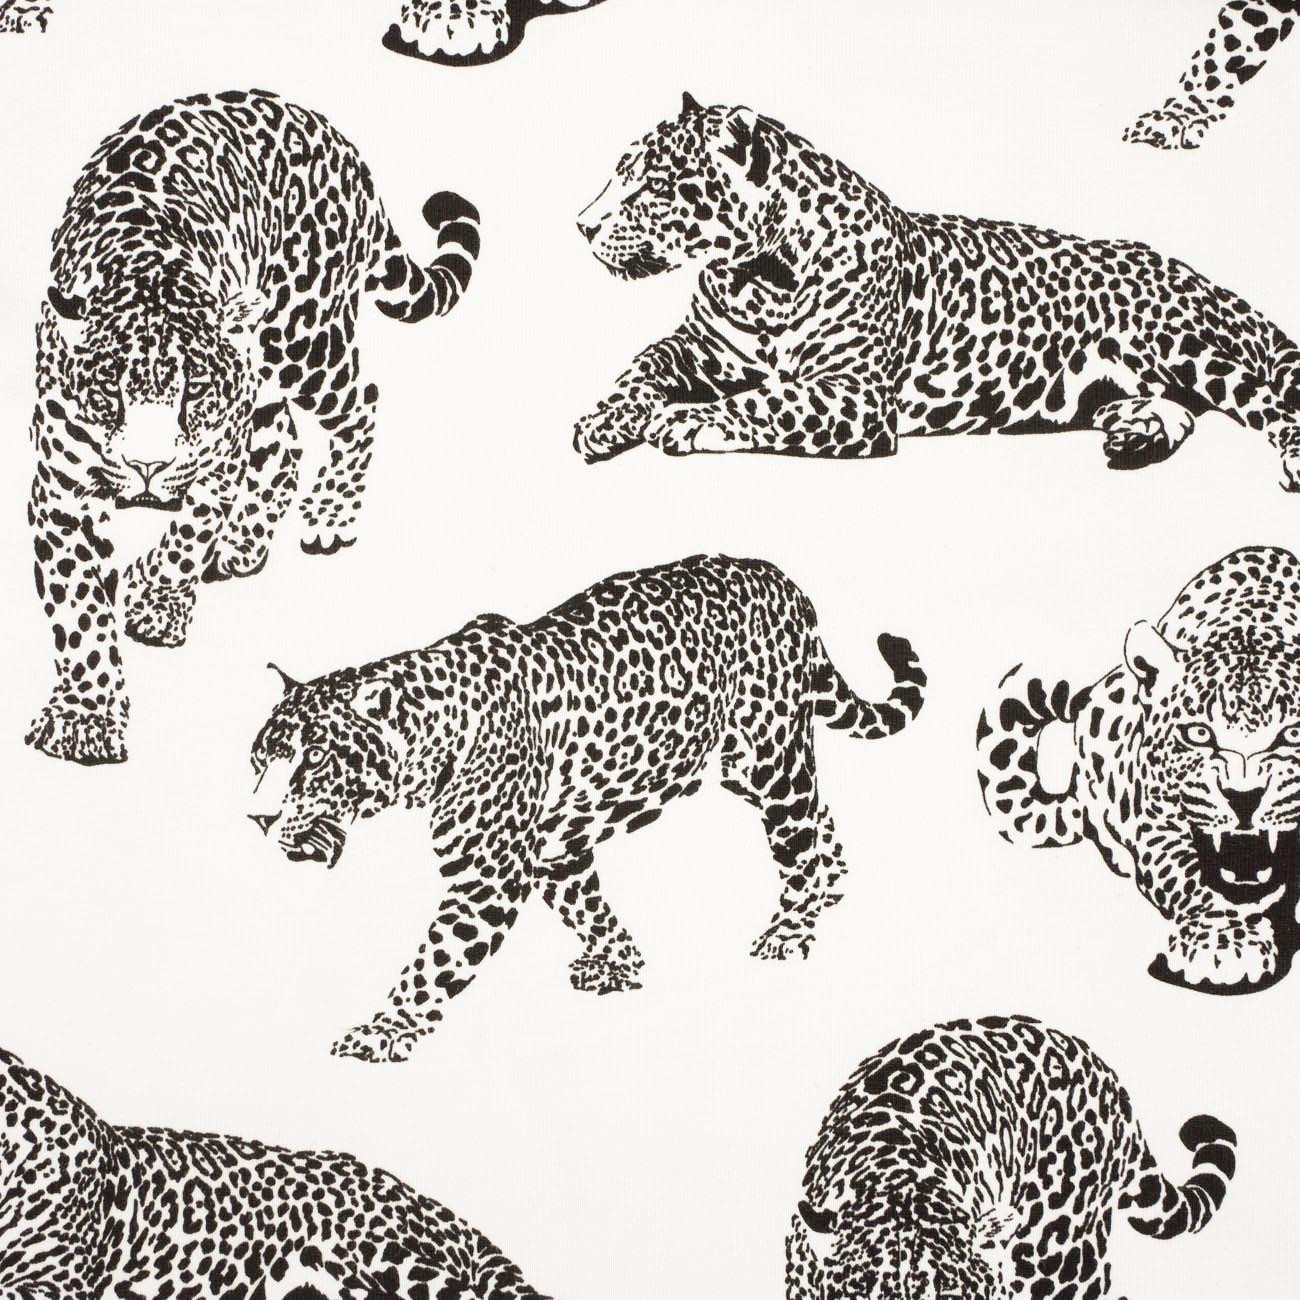 LEOPARDS / white - looped knit fabric